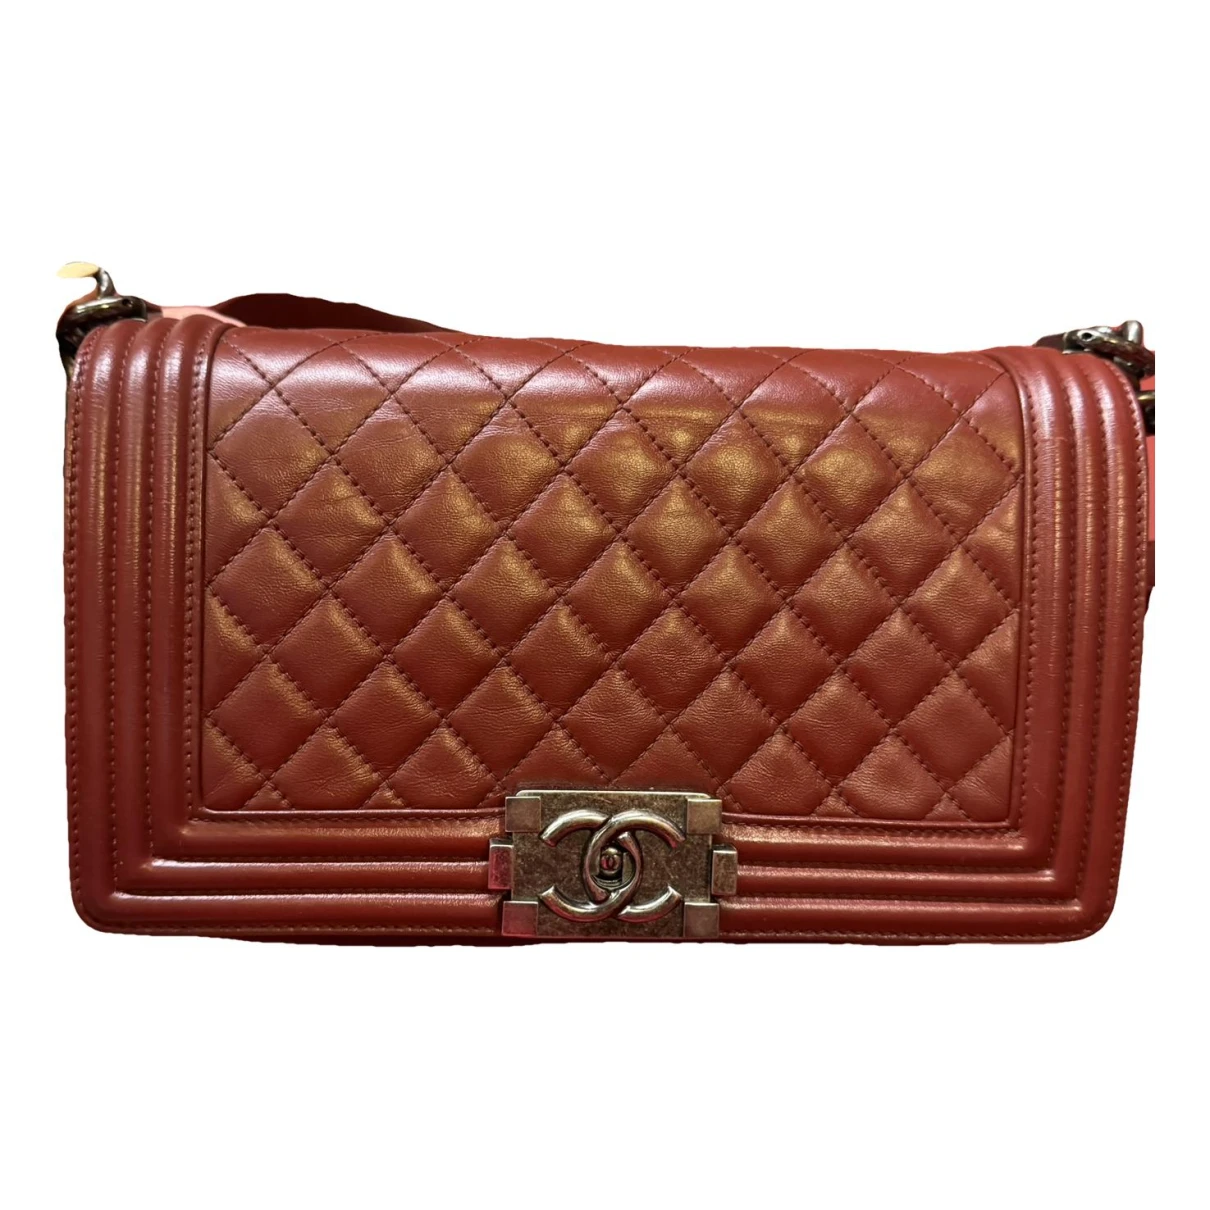 Pre-owned Chanel Boy Leather Crossbody Bag In Burgundy